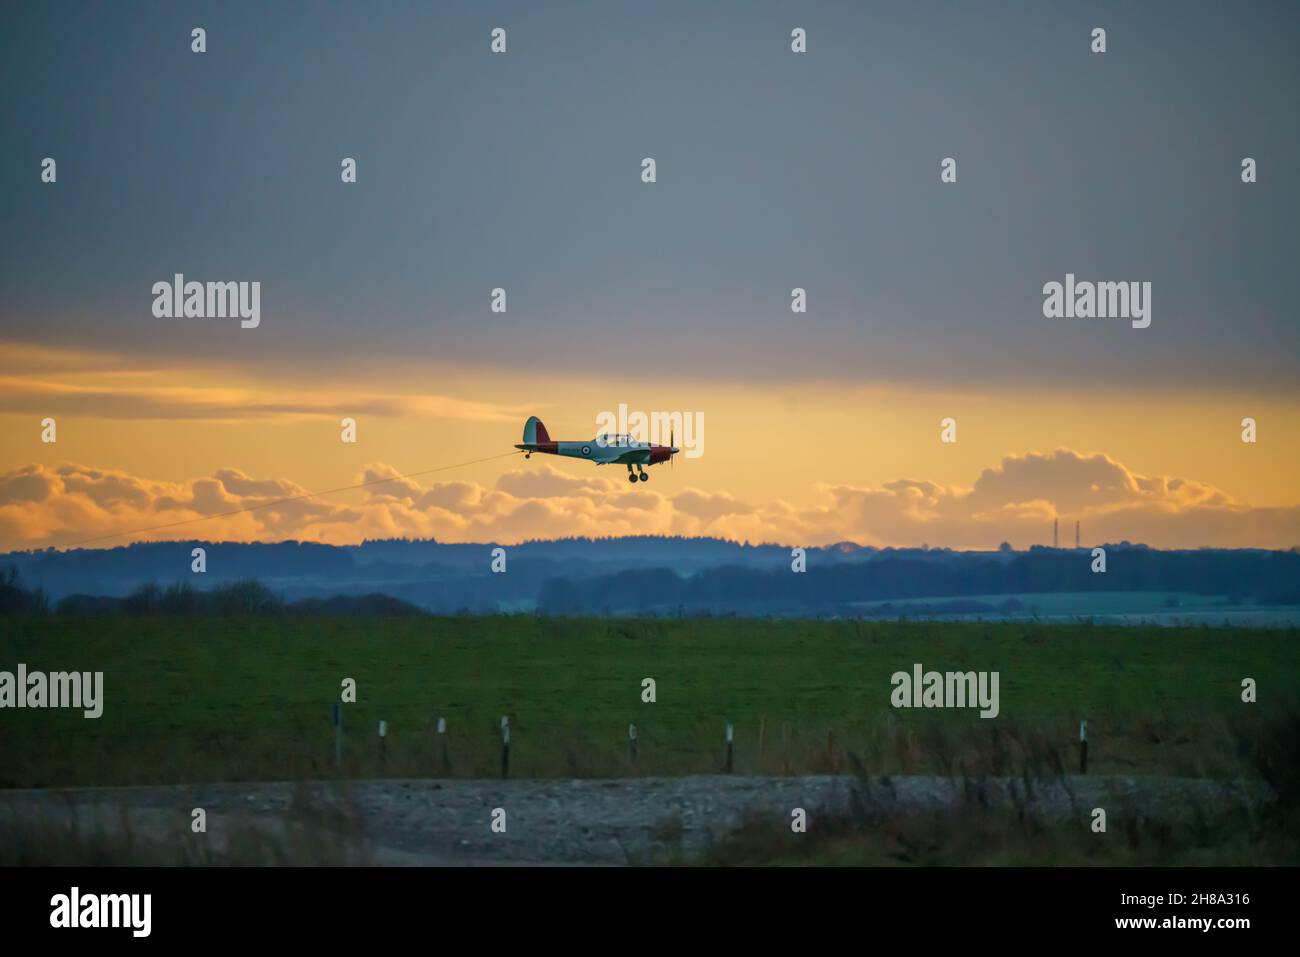 a 1950s De Havilland DHC-1 Chipmunk approaches landing with sunset background, on to a grass runway at Netheravon Airfield, Wiltshire UK Stock Photo